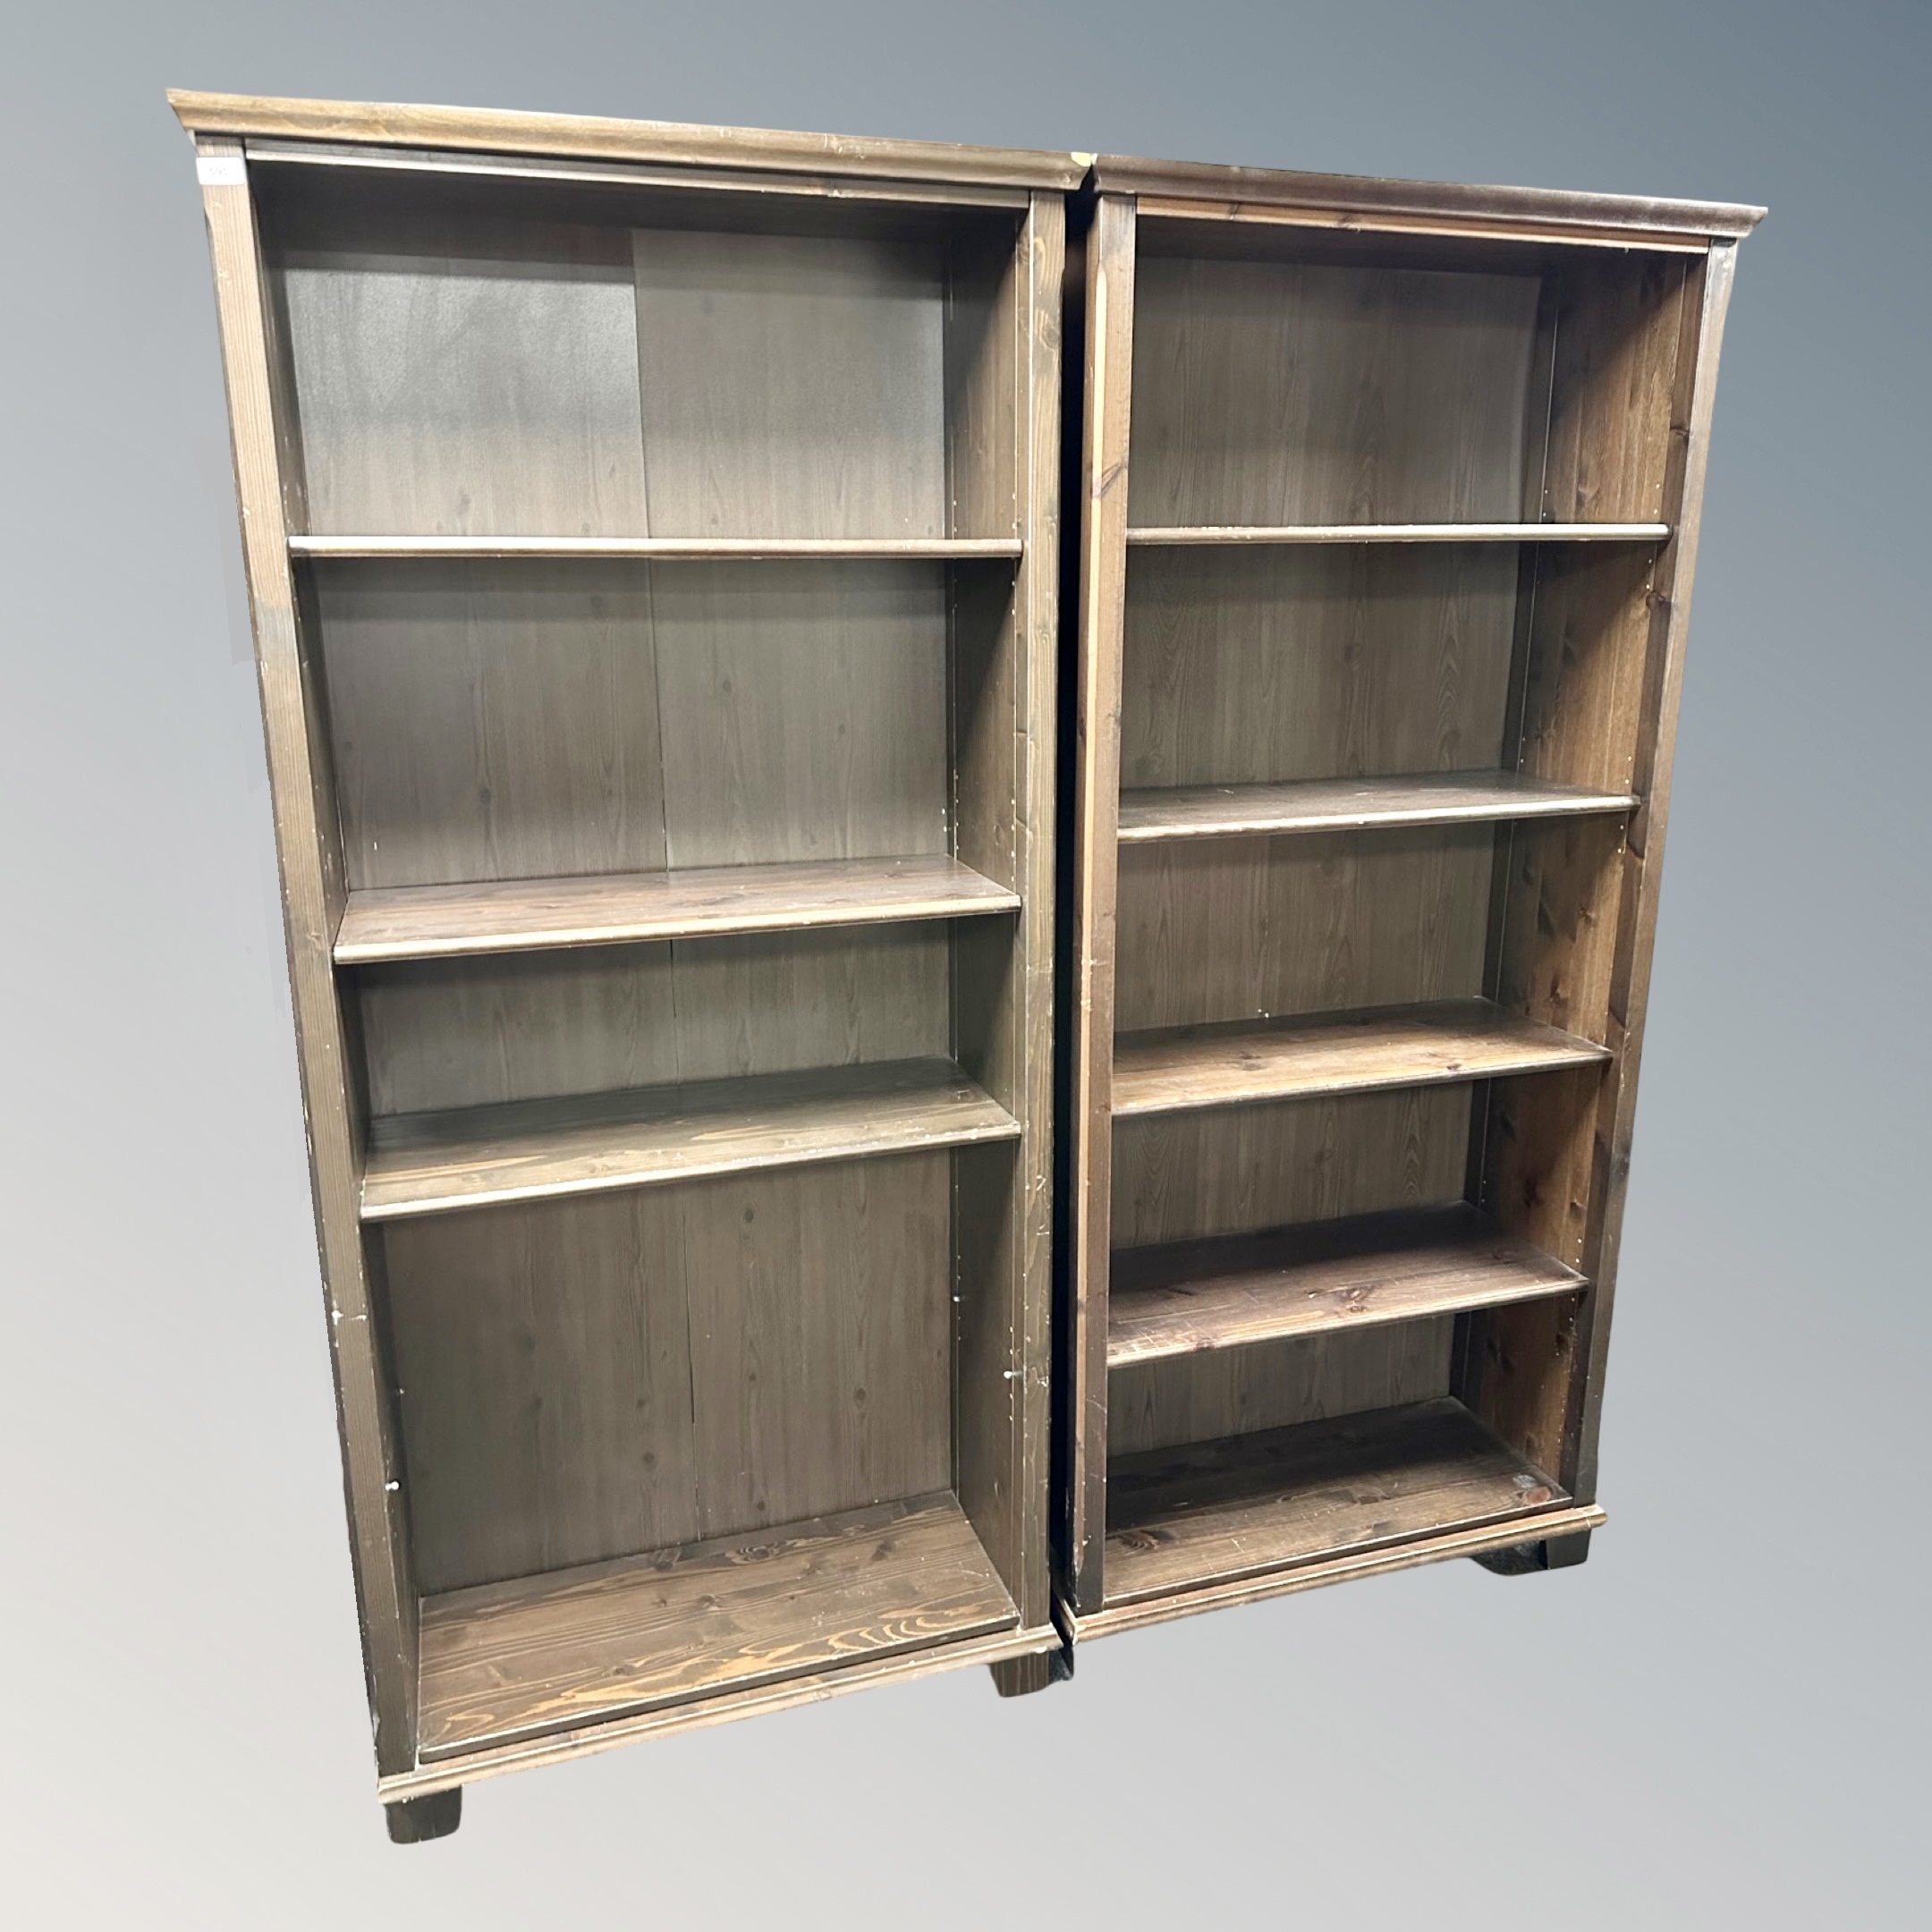 Two sets of contemporary stained pine open shelves